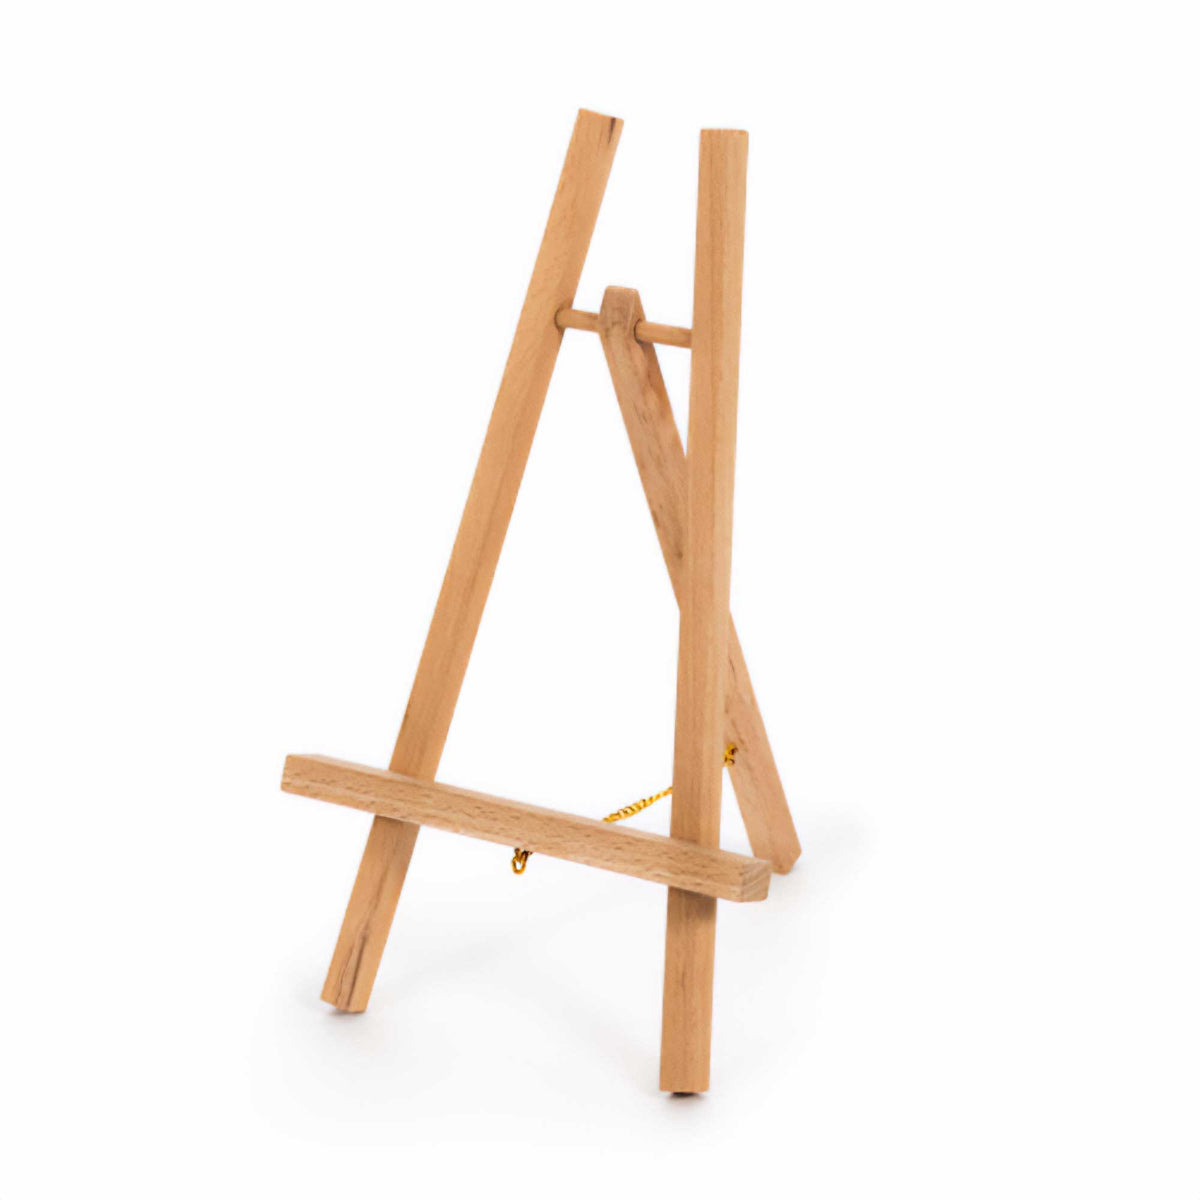 Loxley Cheshire Display Easel